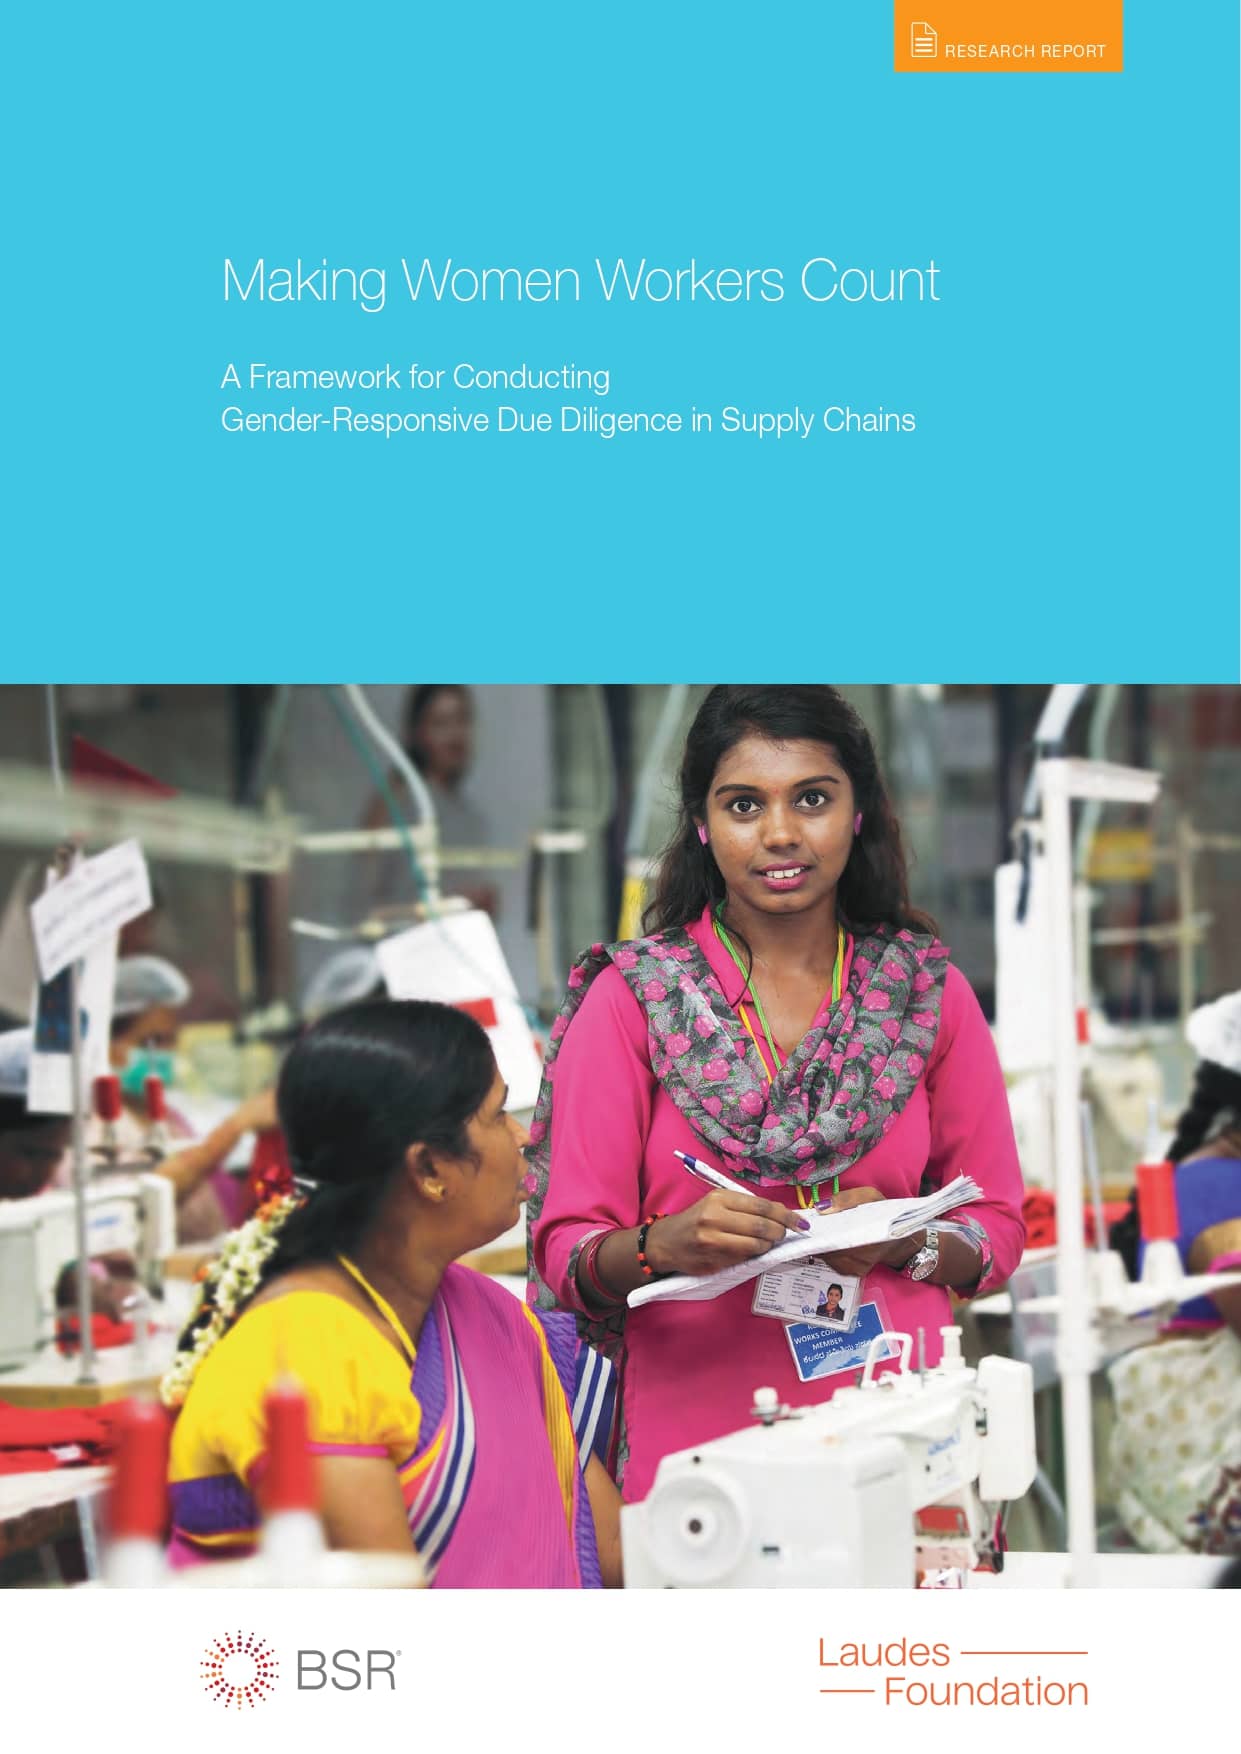 Making Women Workers Count A Framework for Conducting Gender-Responsive Due Diligence in Supply Chains (BSR and laudes foundation 2019)